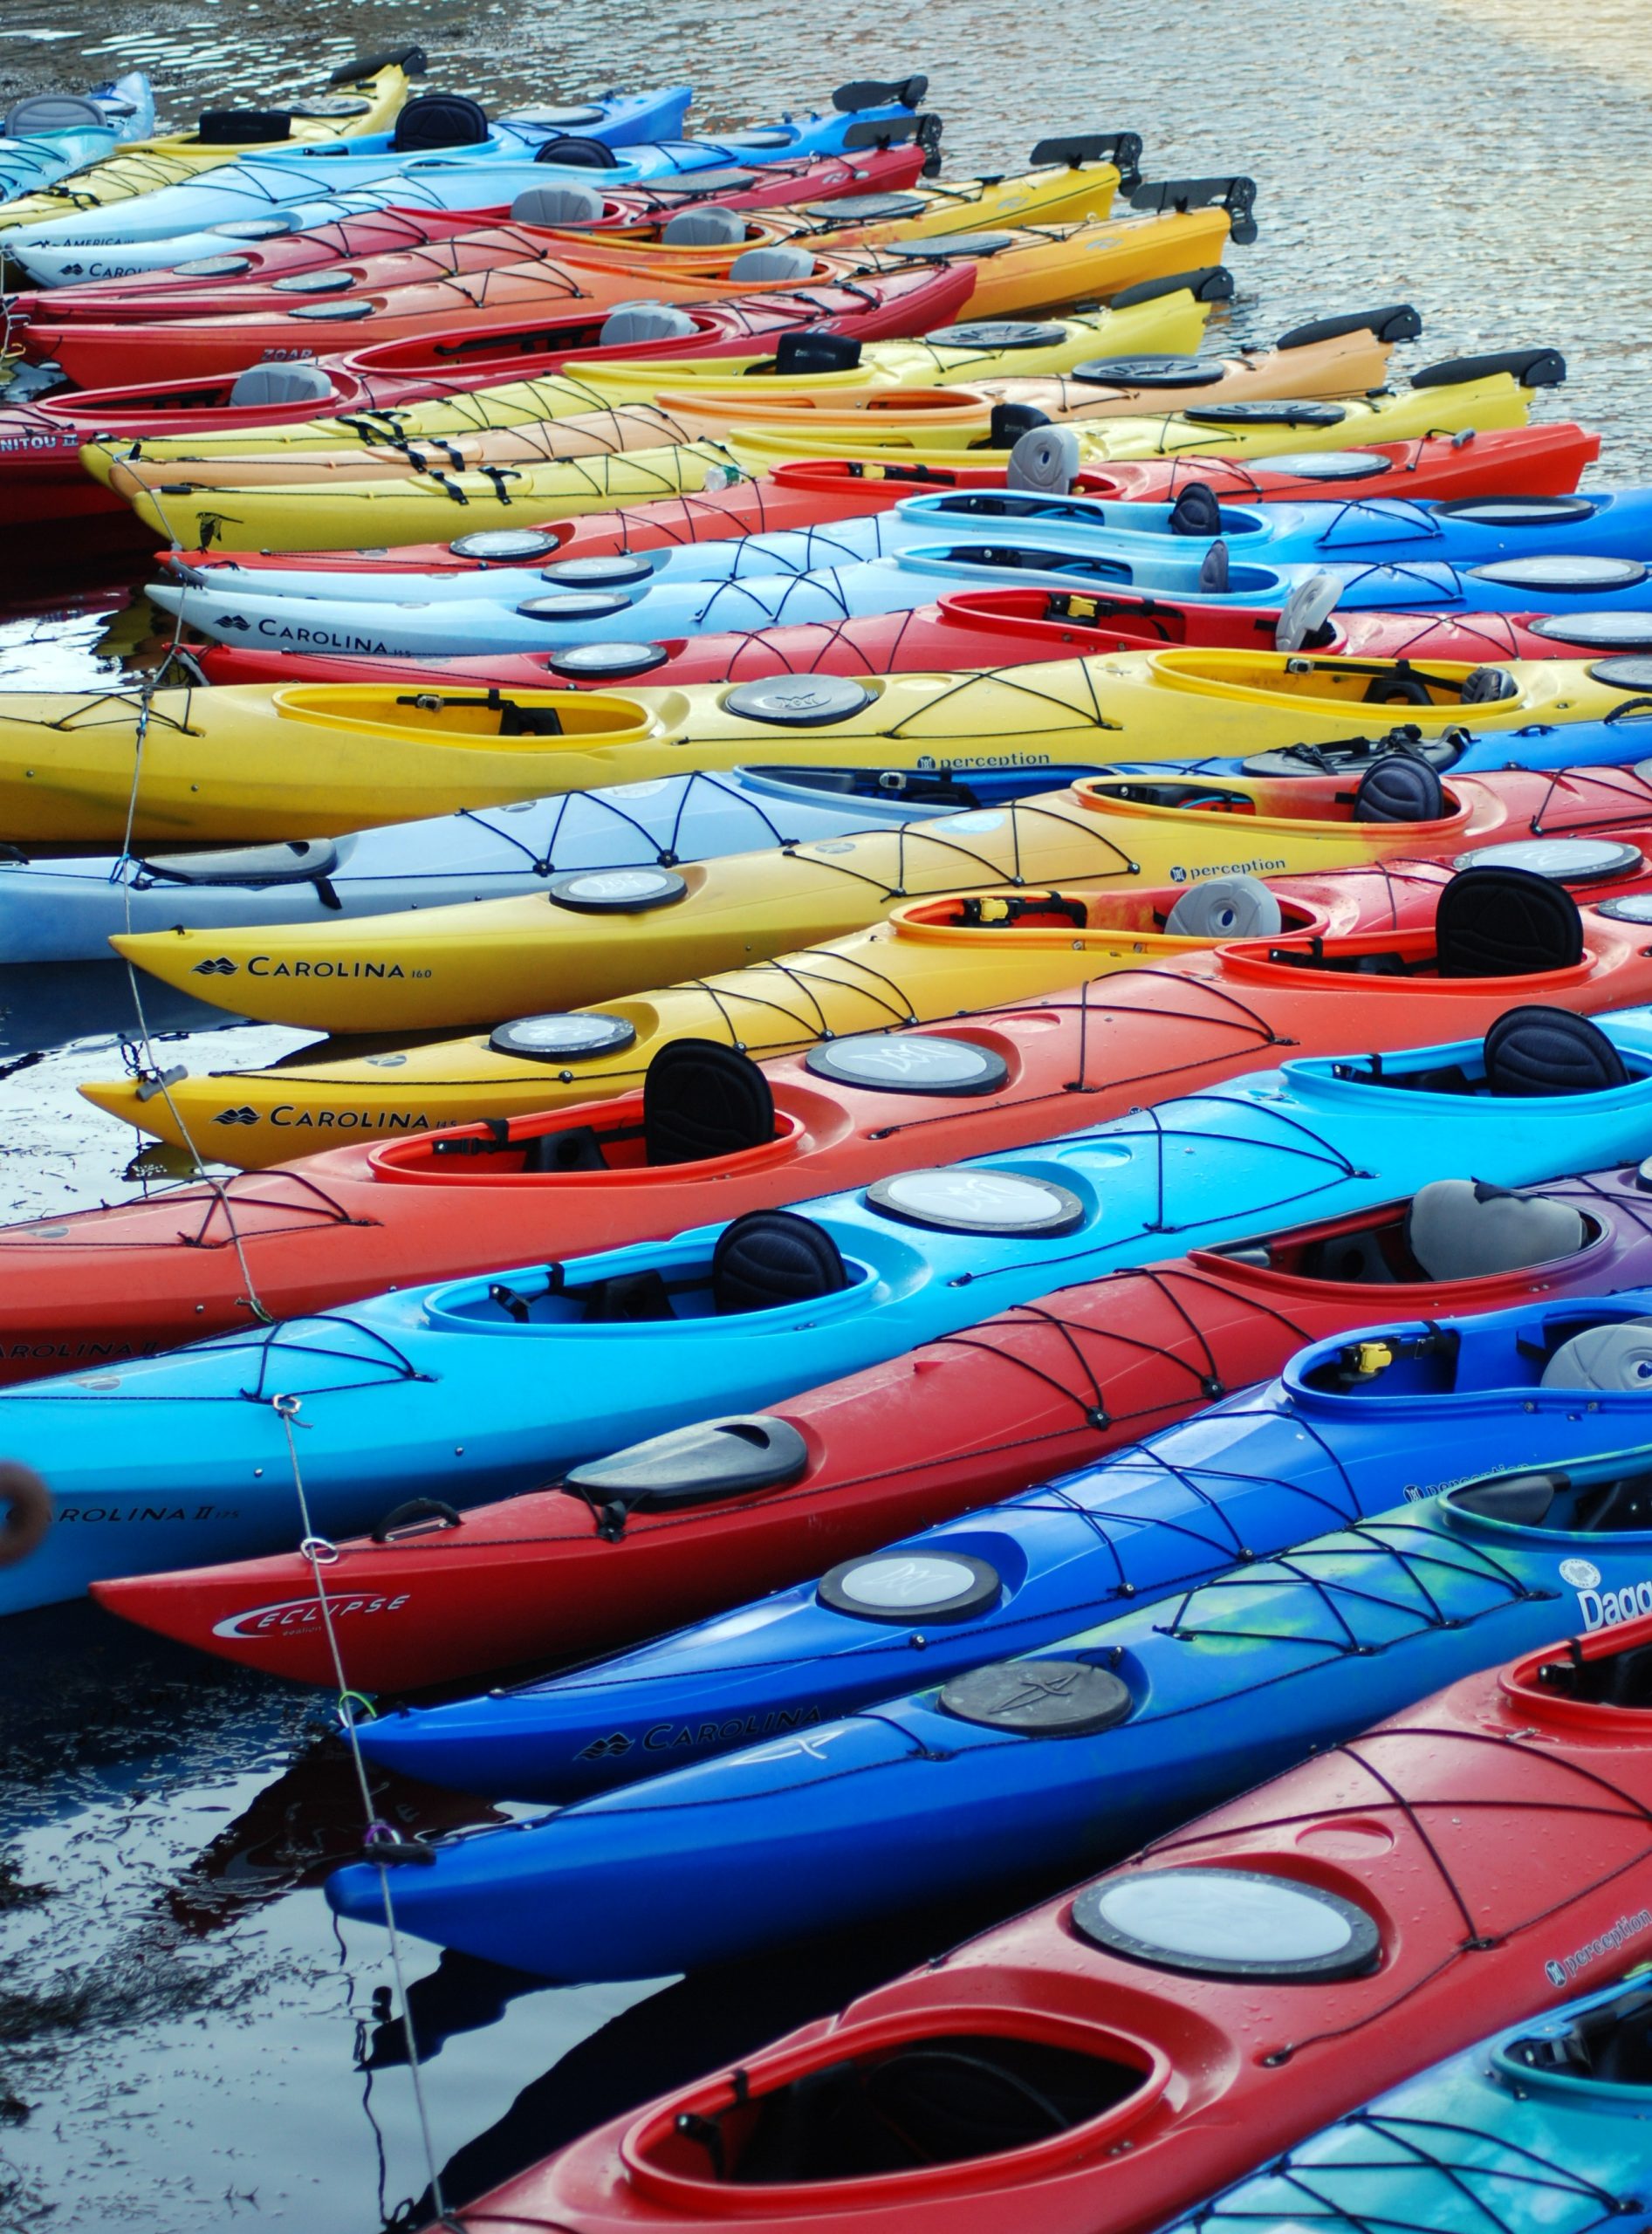 Kayaks at Rest (user submitted)